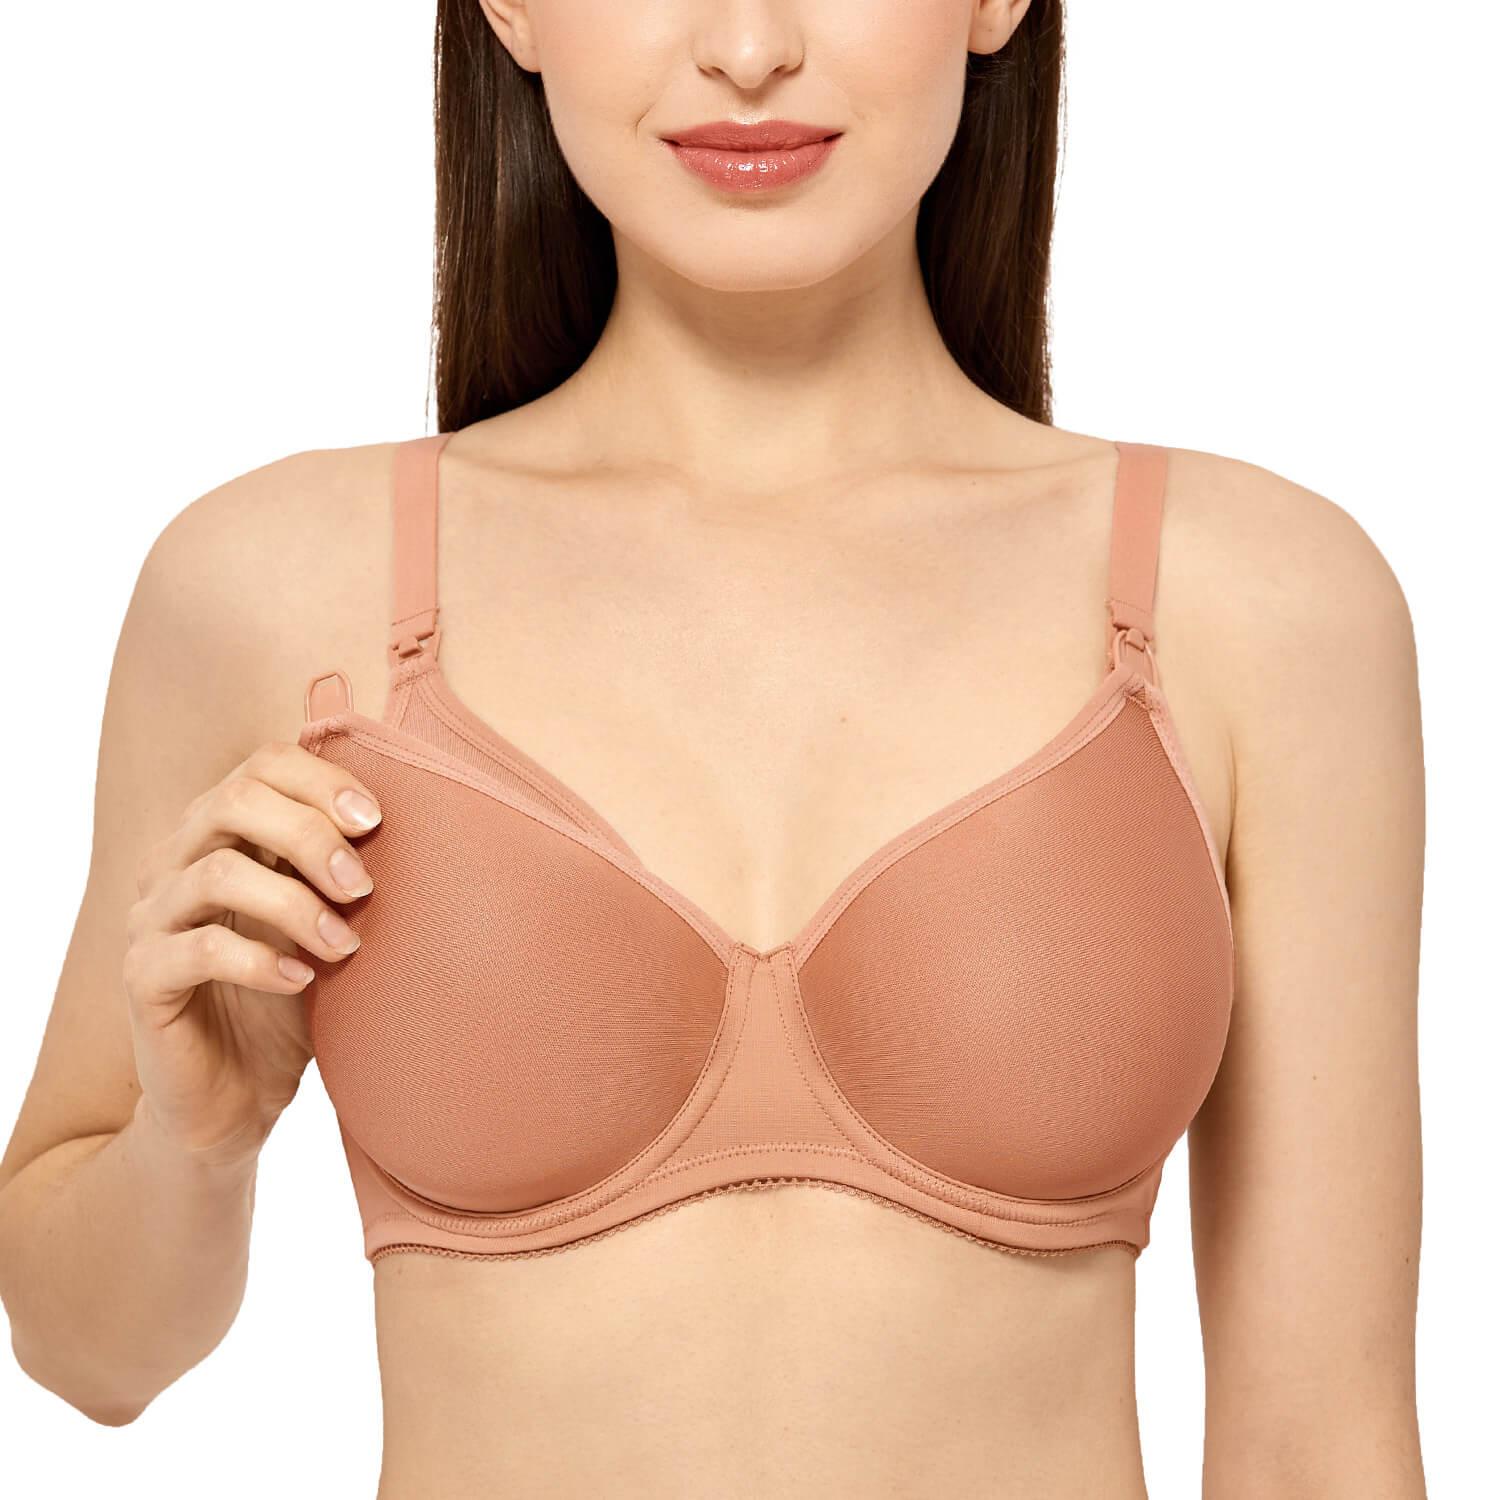 34C Bra Size in C Cup Sizes by Anita Lace Cup, Maternity and